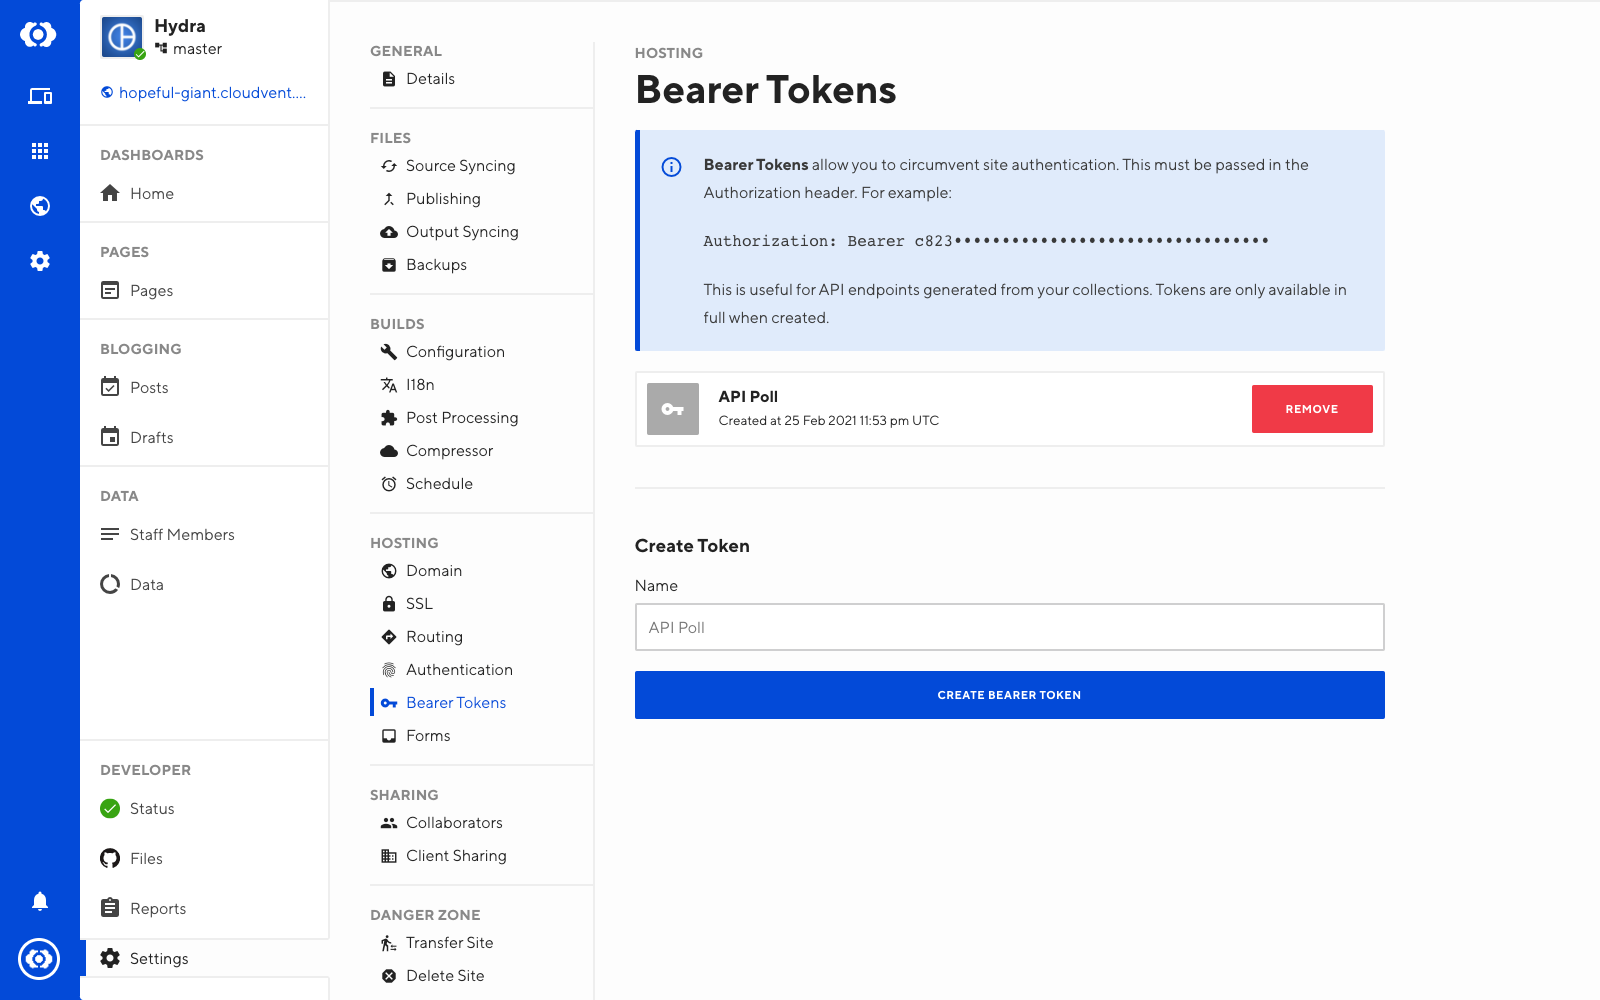 What is Bearer Token Authentication? 